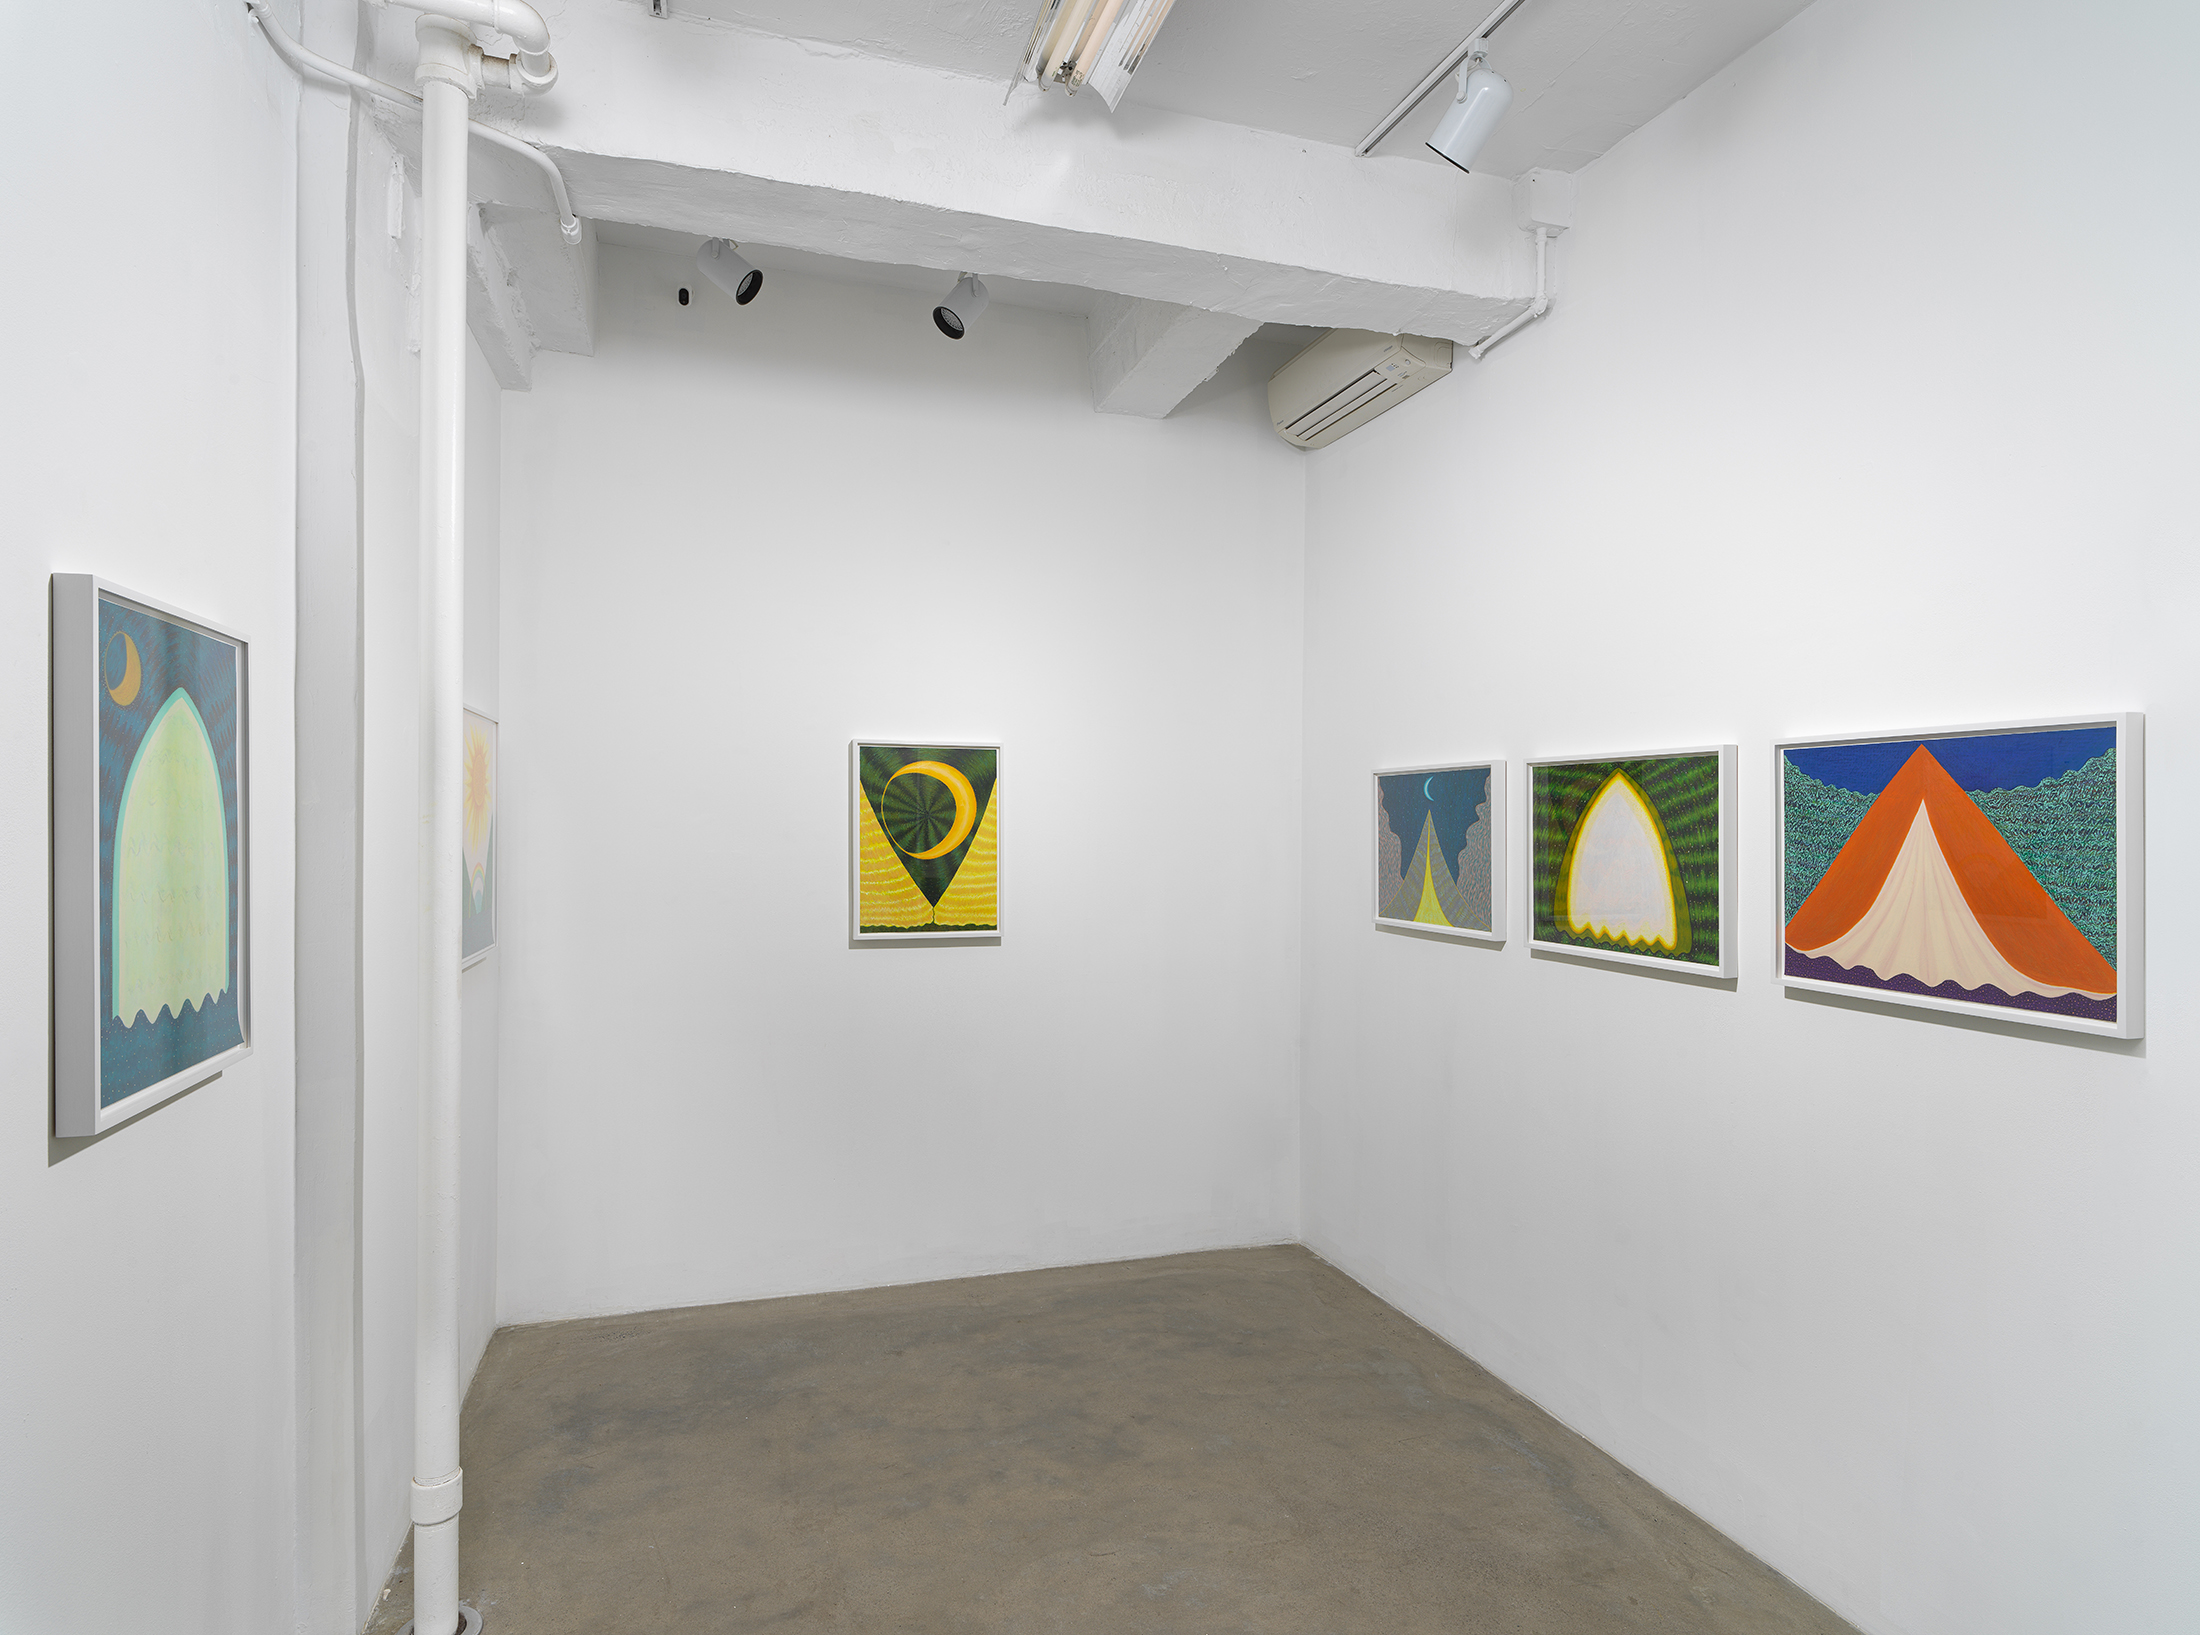 Ping Zheng, Installation view showing framed works on paper: 'In the Blue Light,' 'Chasing Moonlight,' and other landscape-based works